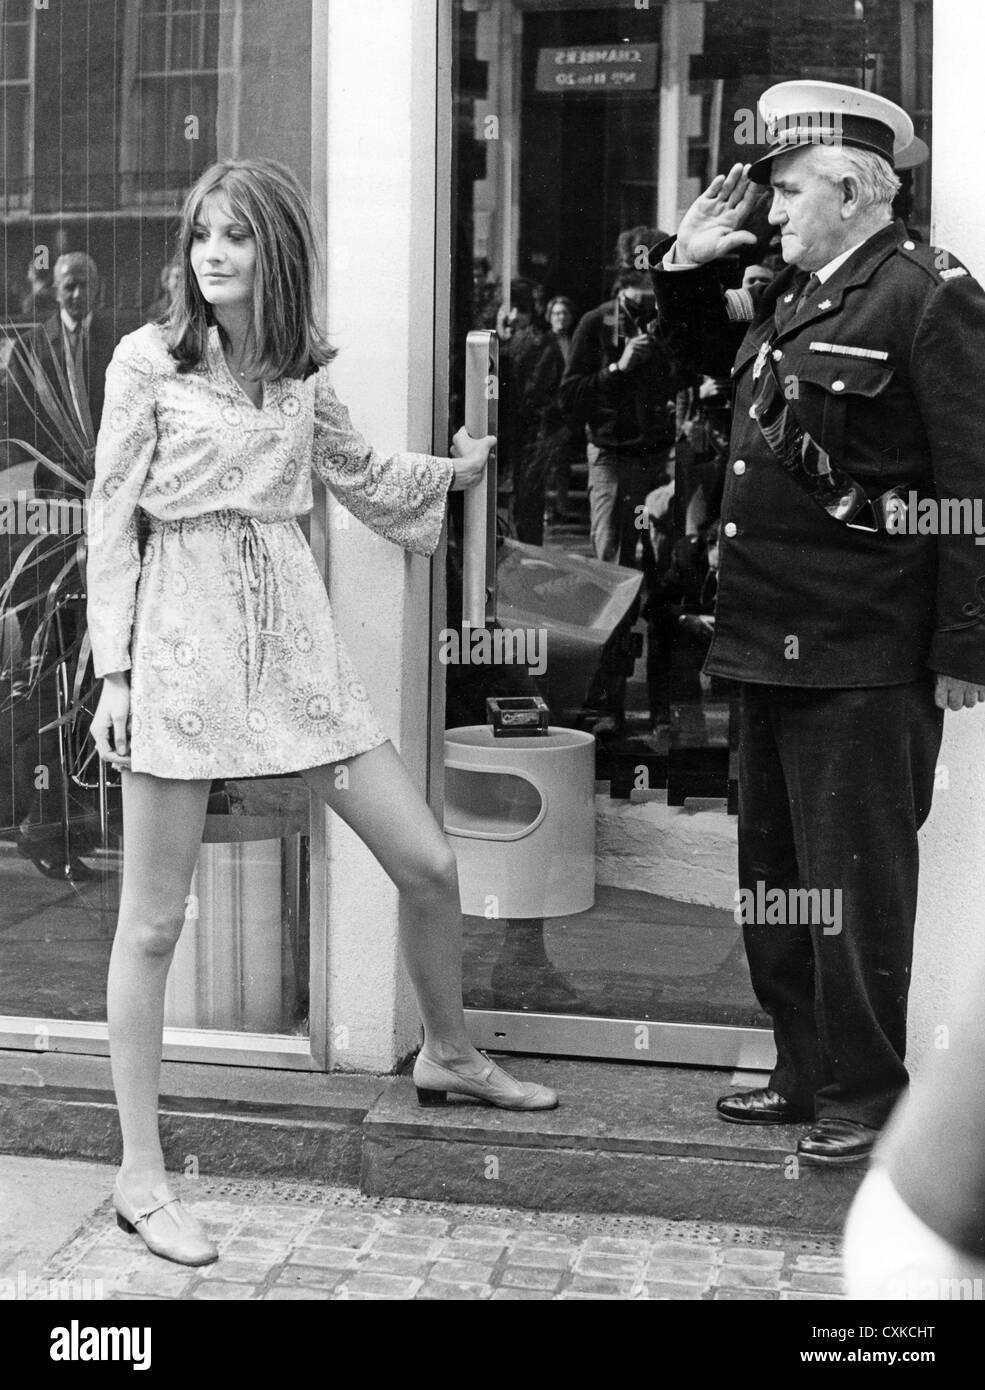 SANDIE SHAW  UK pop singer at the opening of her boutique in Great Tichfield Street, London, 27 September 1967. Photo Tony Gale Stock Photo